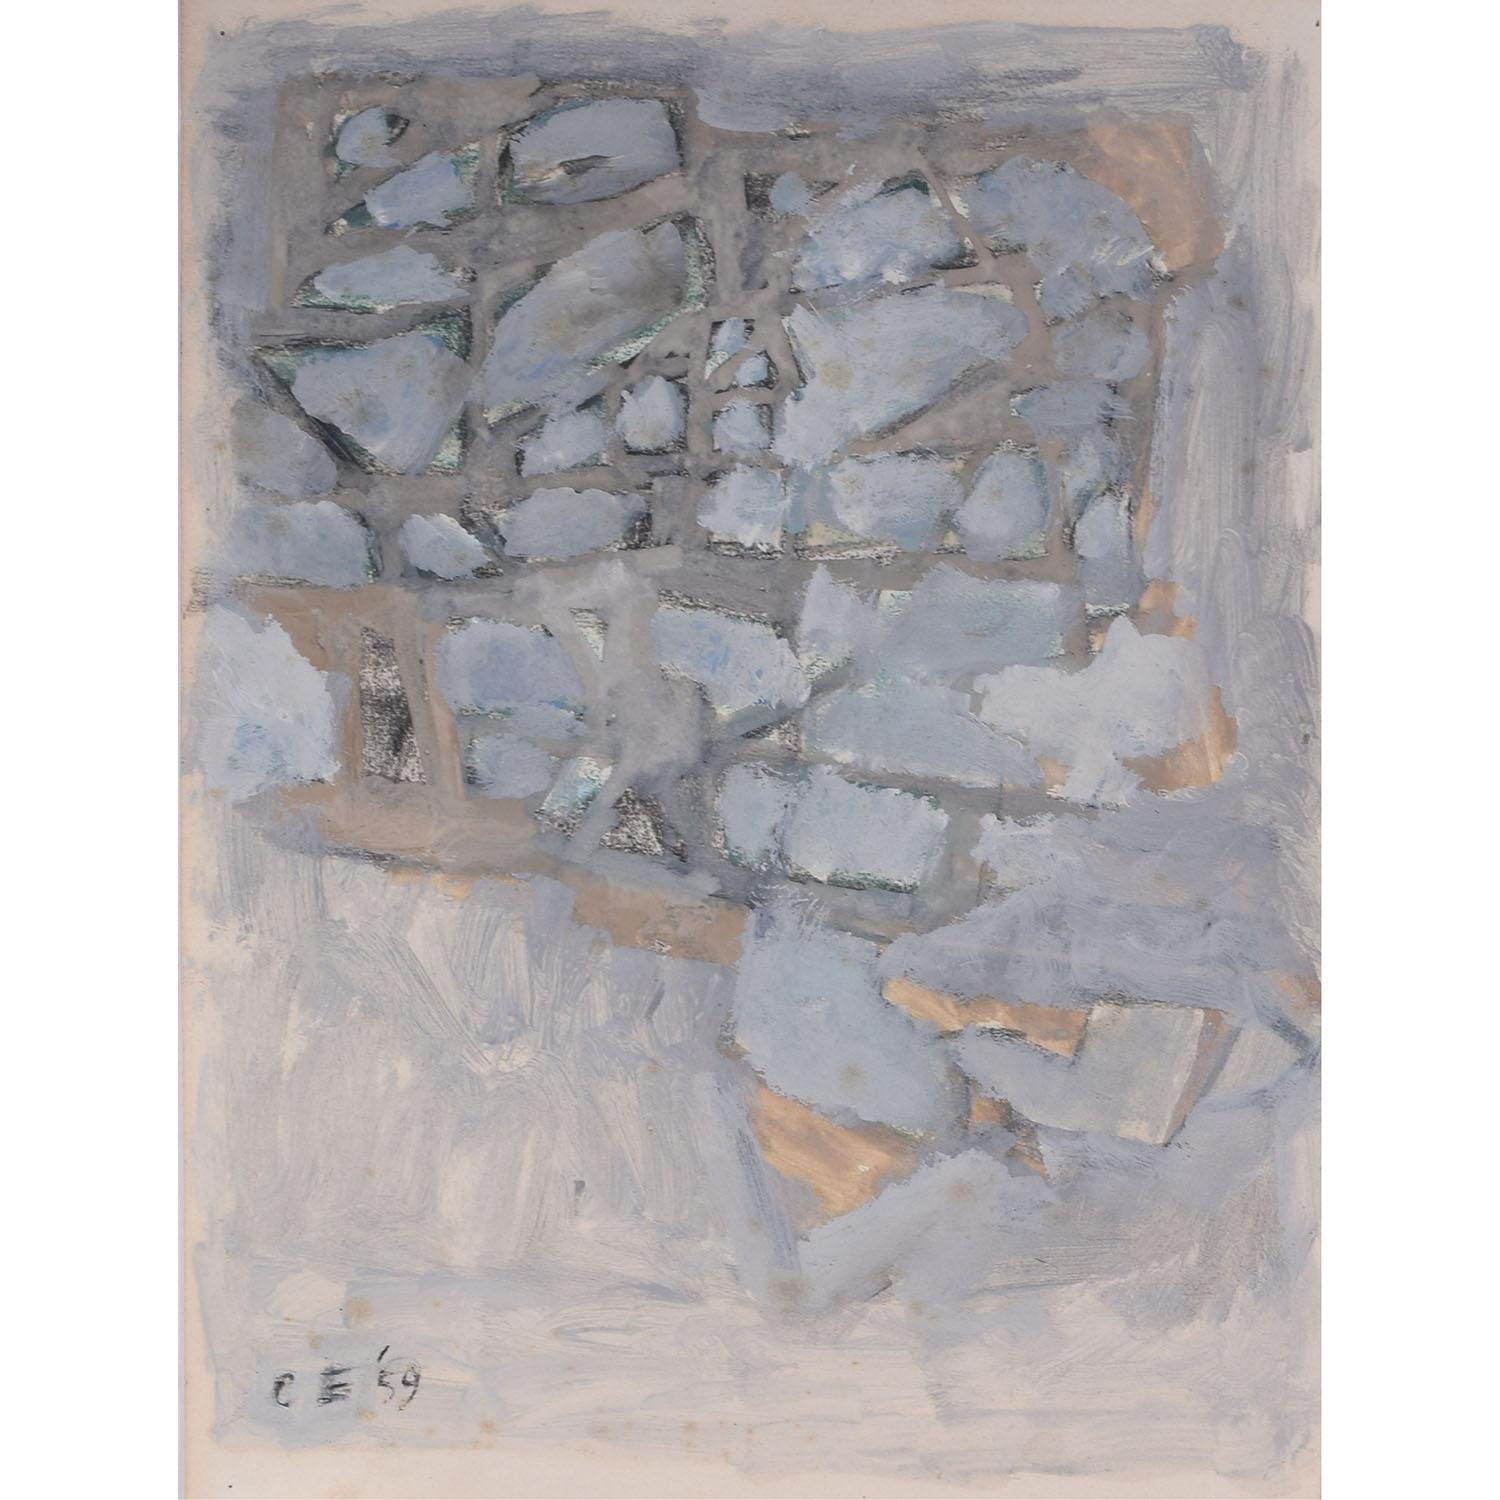 We acquired a series of paintings from Clifford and Rosemary Ellis's studio. To find more scroll down to "More from this Seller" and below it click on "See all from this seller." 

Clifford Ellis (1907-1985)
Abstract in White c.